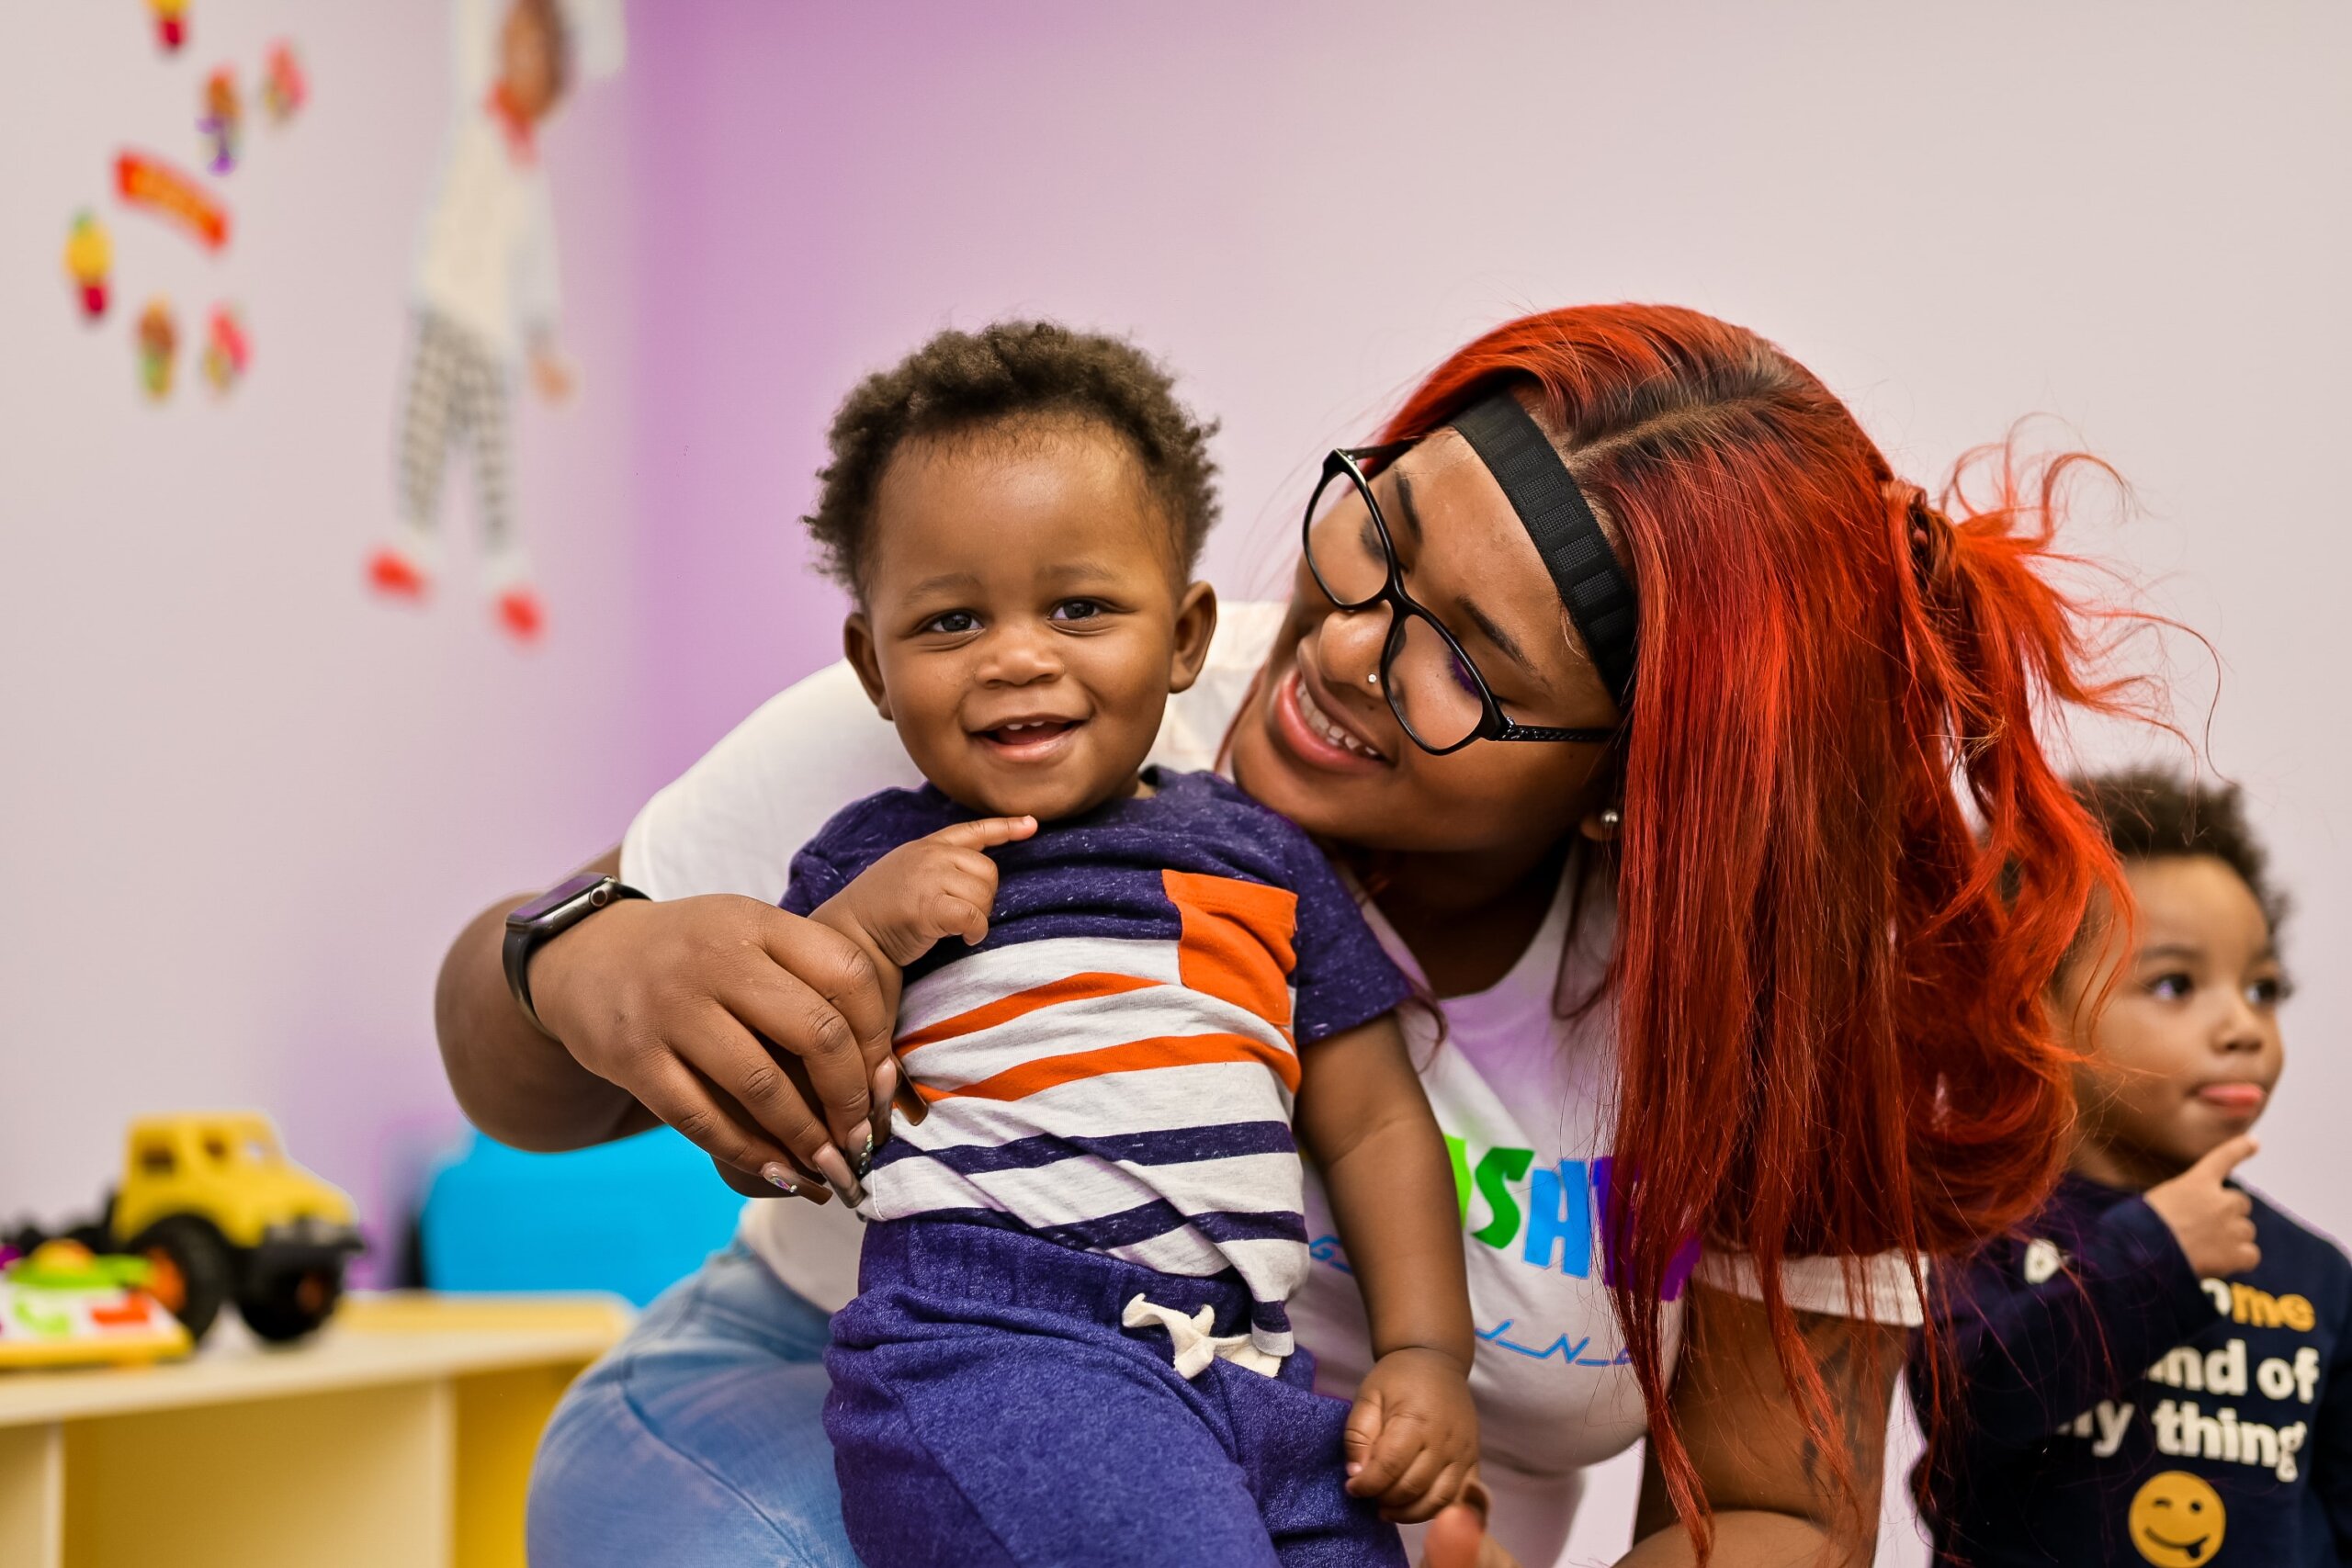 A caring daycare teacher smiles as she holds a toddler, showing the warmth and affectionate environment at Little Scholars Daycare.